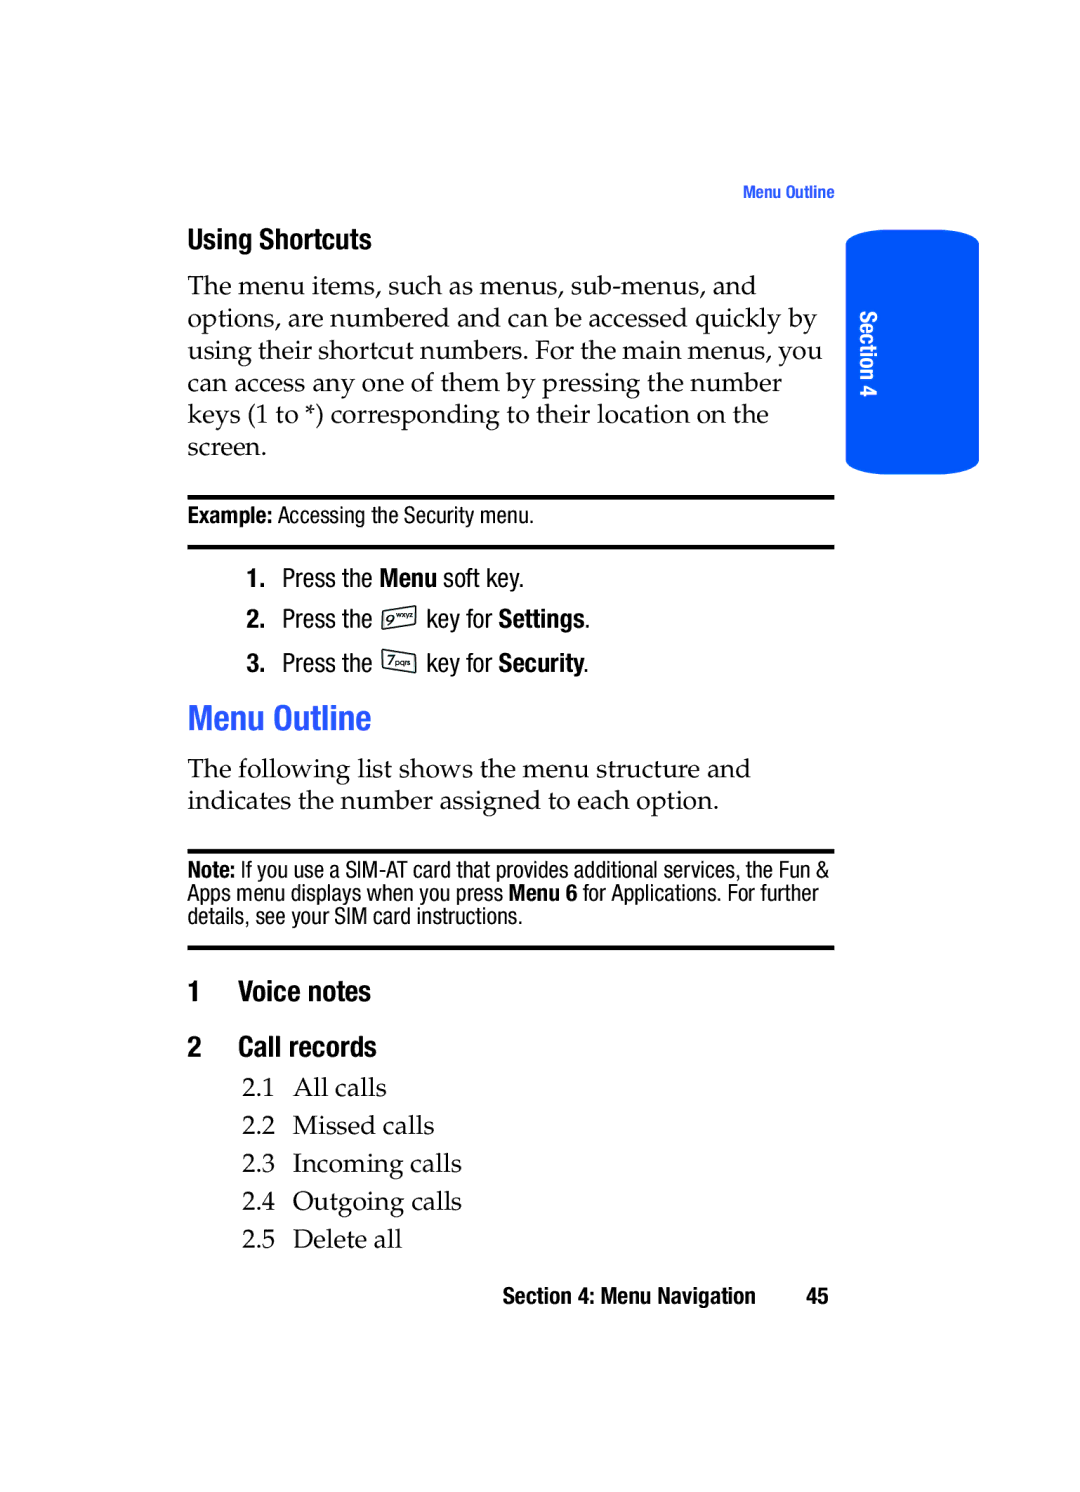 Samsung SGH-T519 manual Menu Outline, Using Shortcuts, Voice notes Call records 